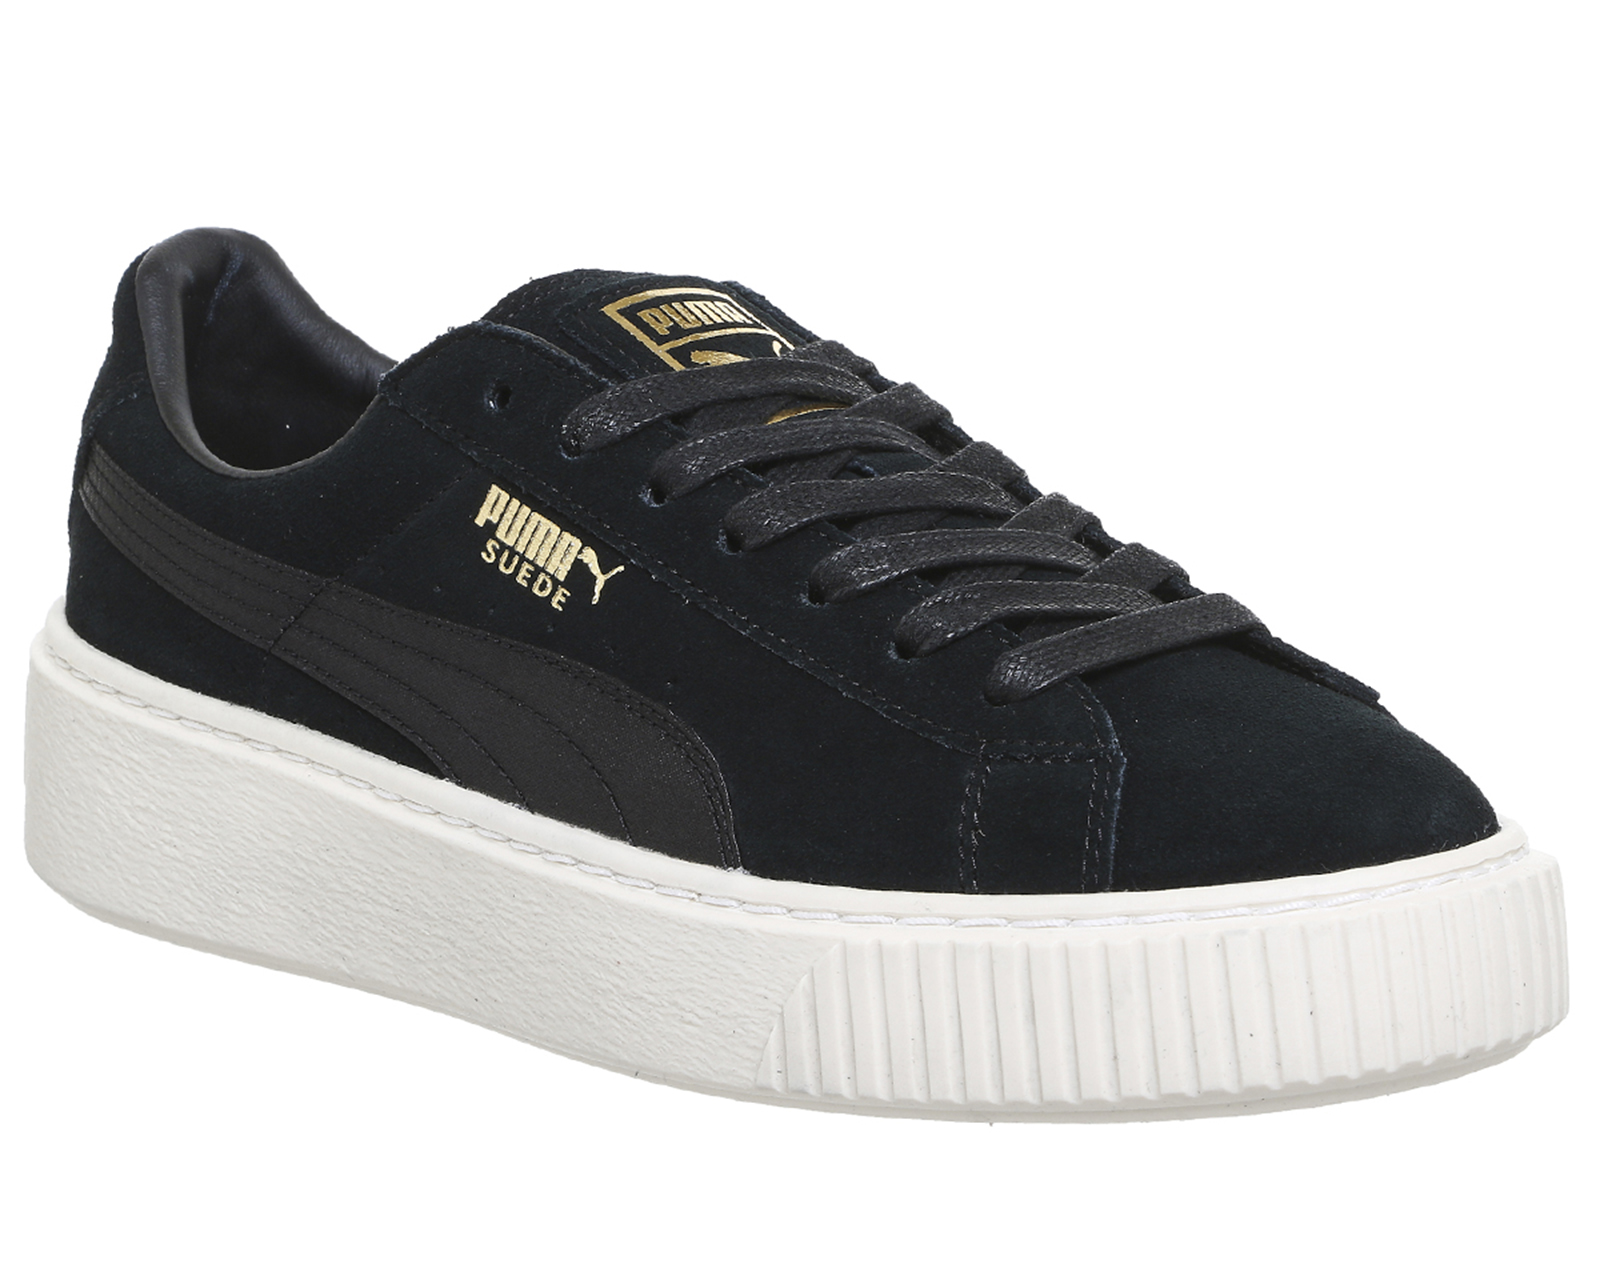 Puma Suede Platform Trainers Black Gold Satin - Hers trainers